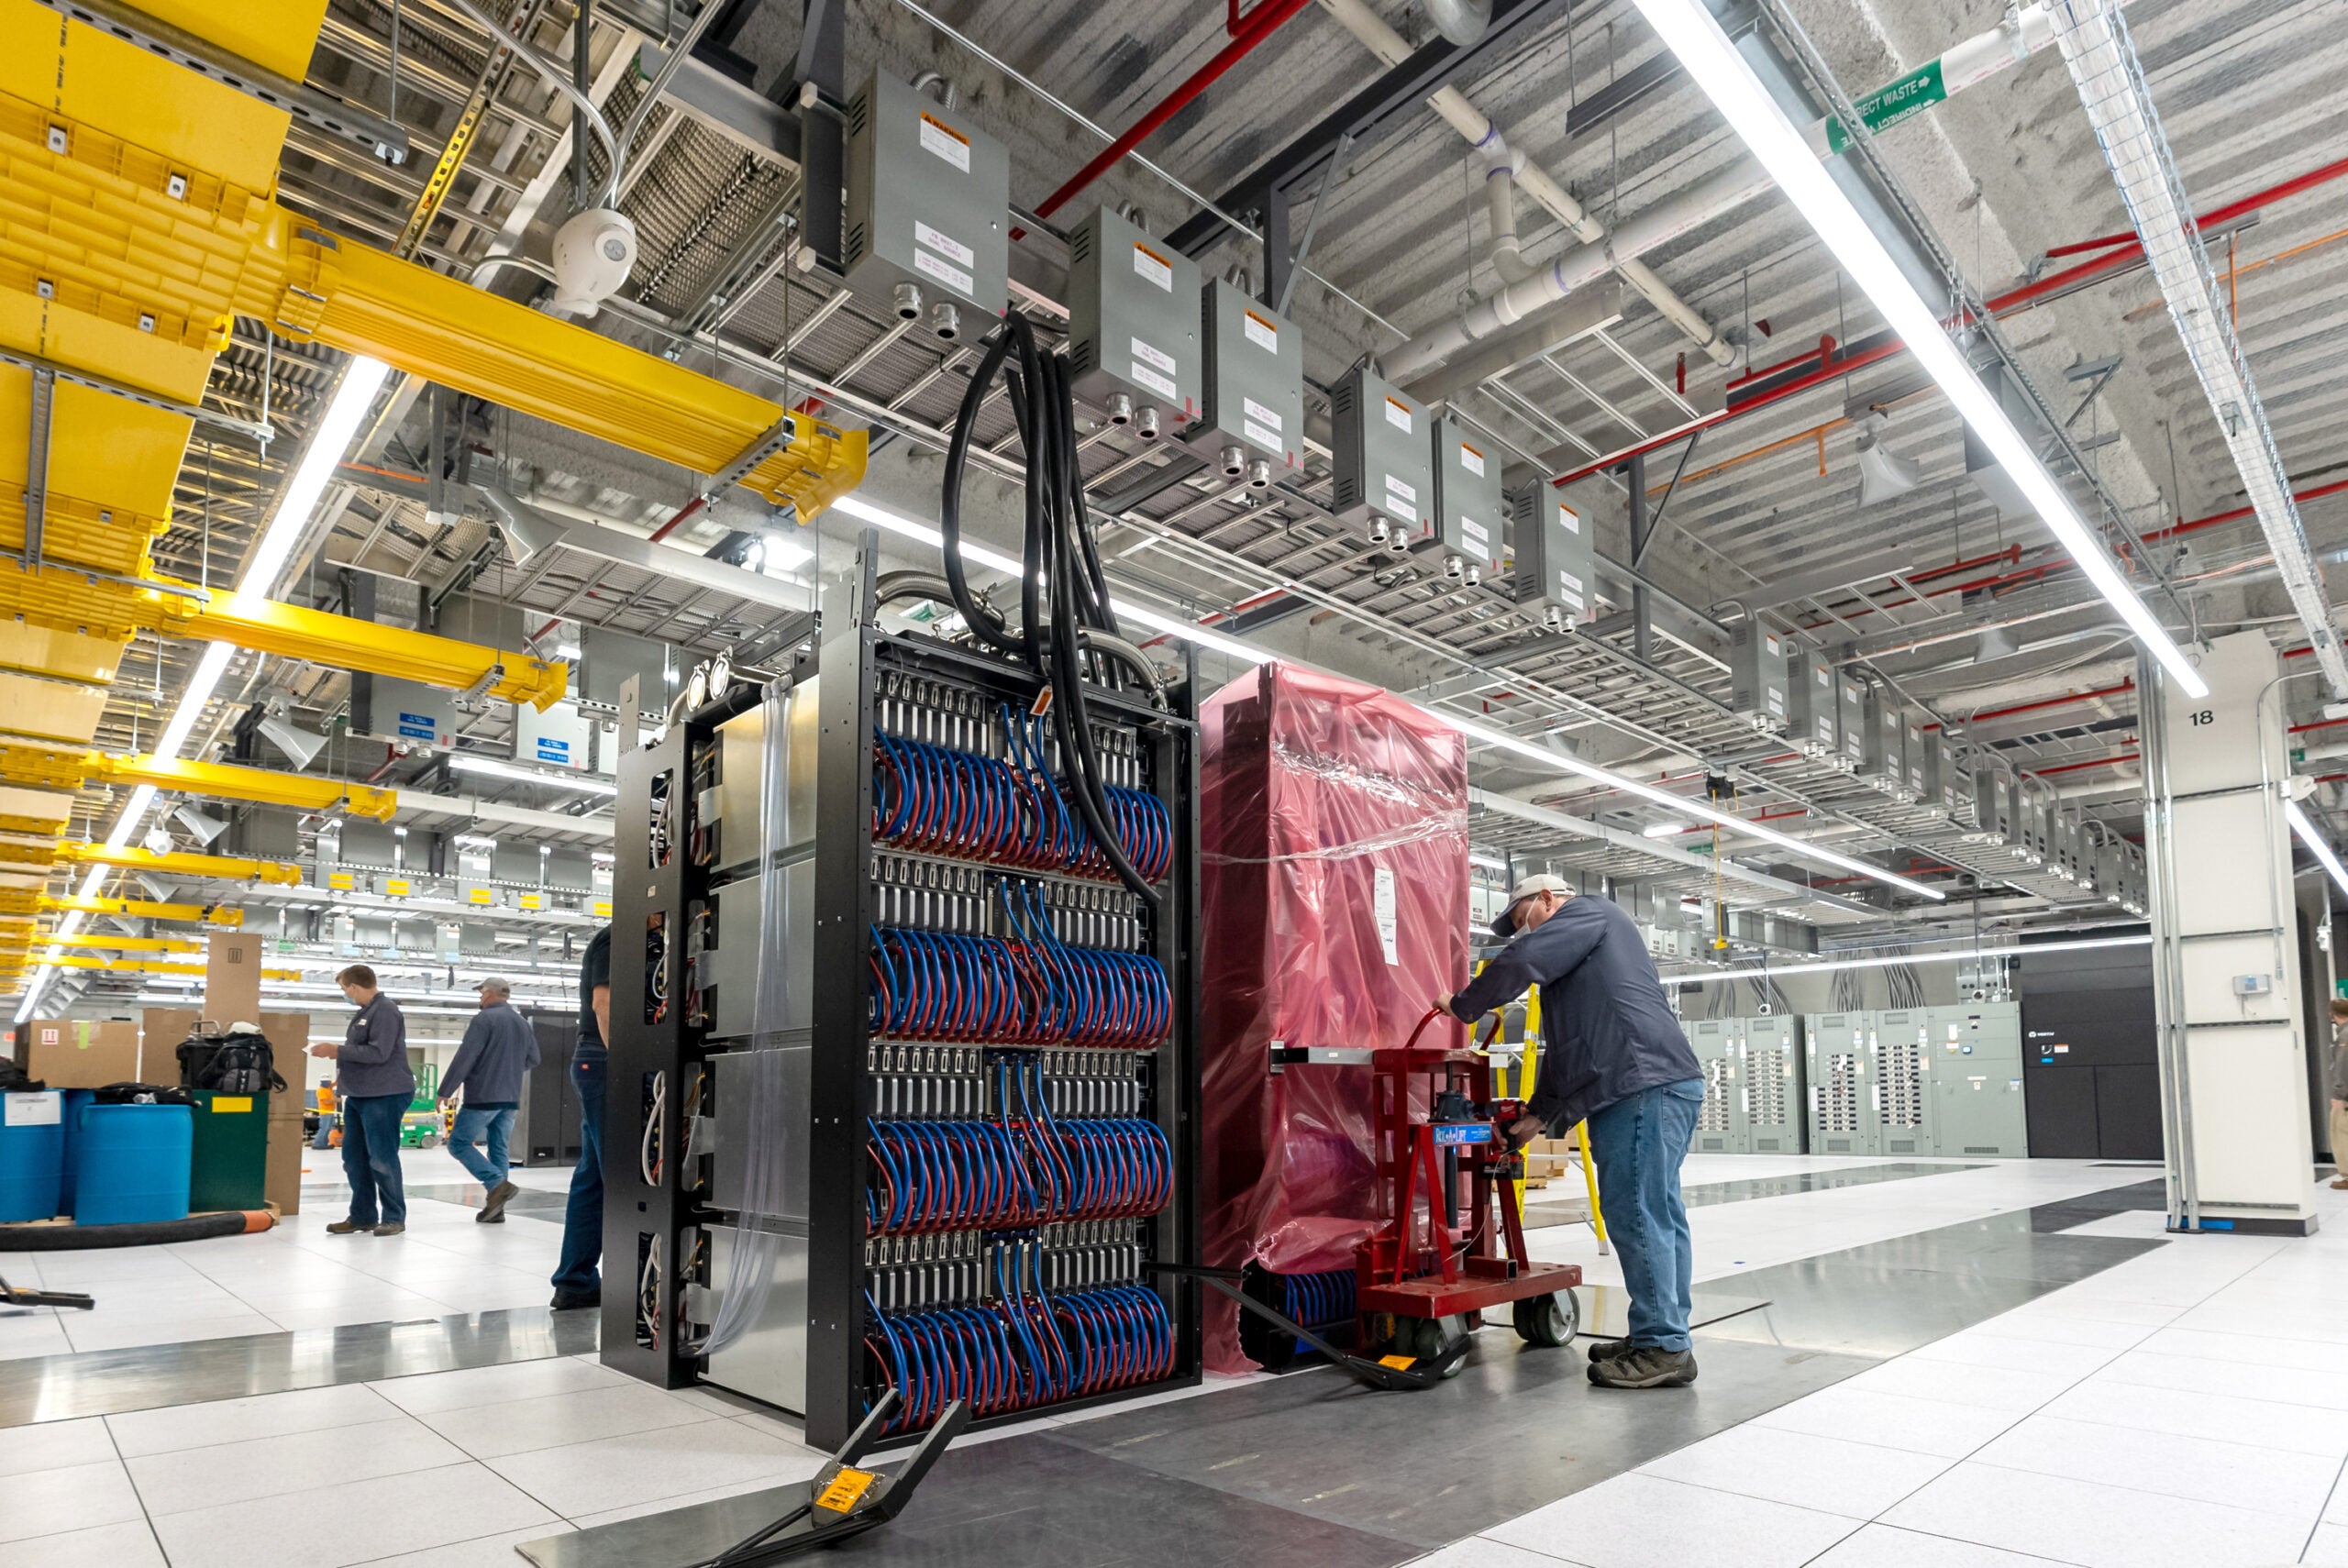 The new Frontier supercomputer will be the fastest in the world